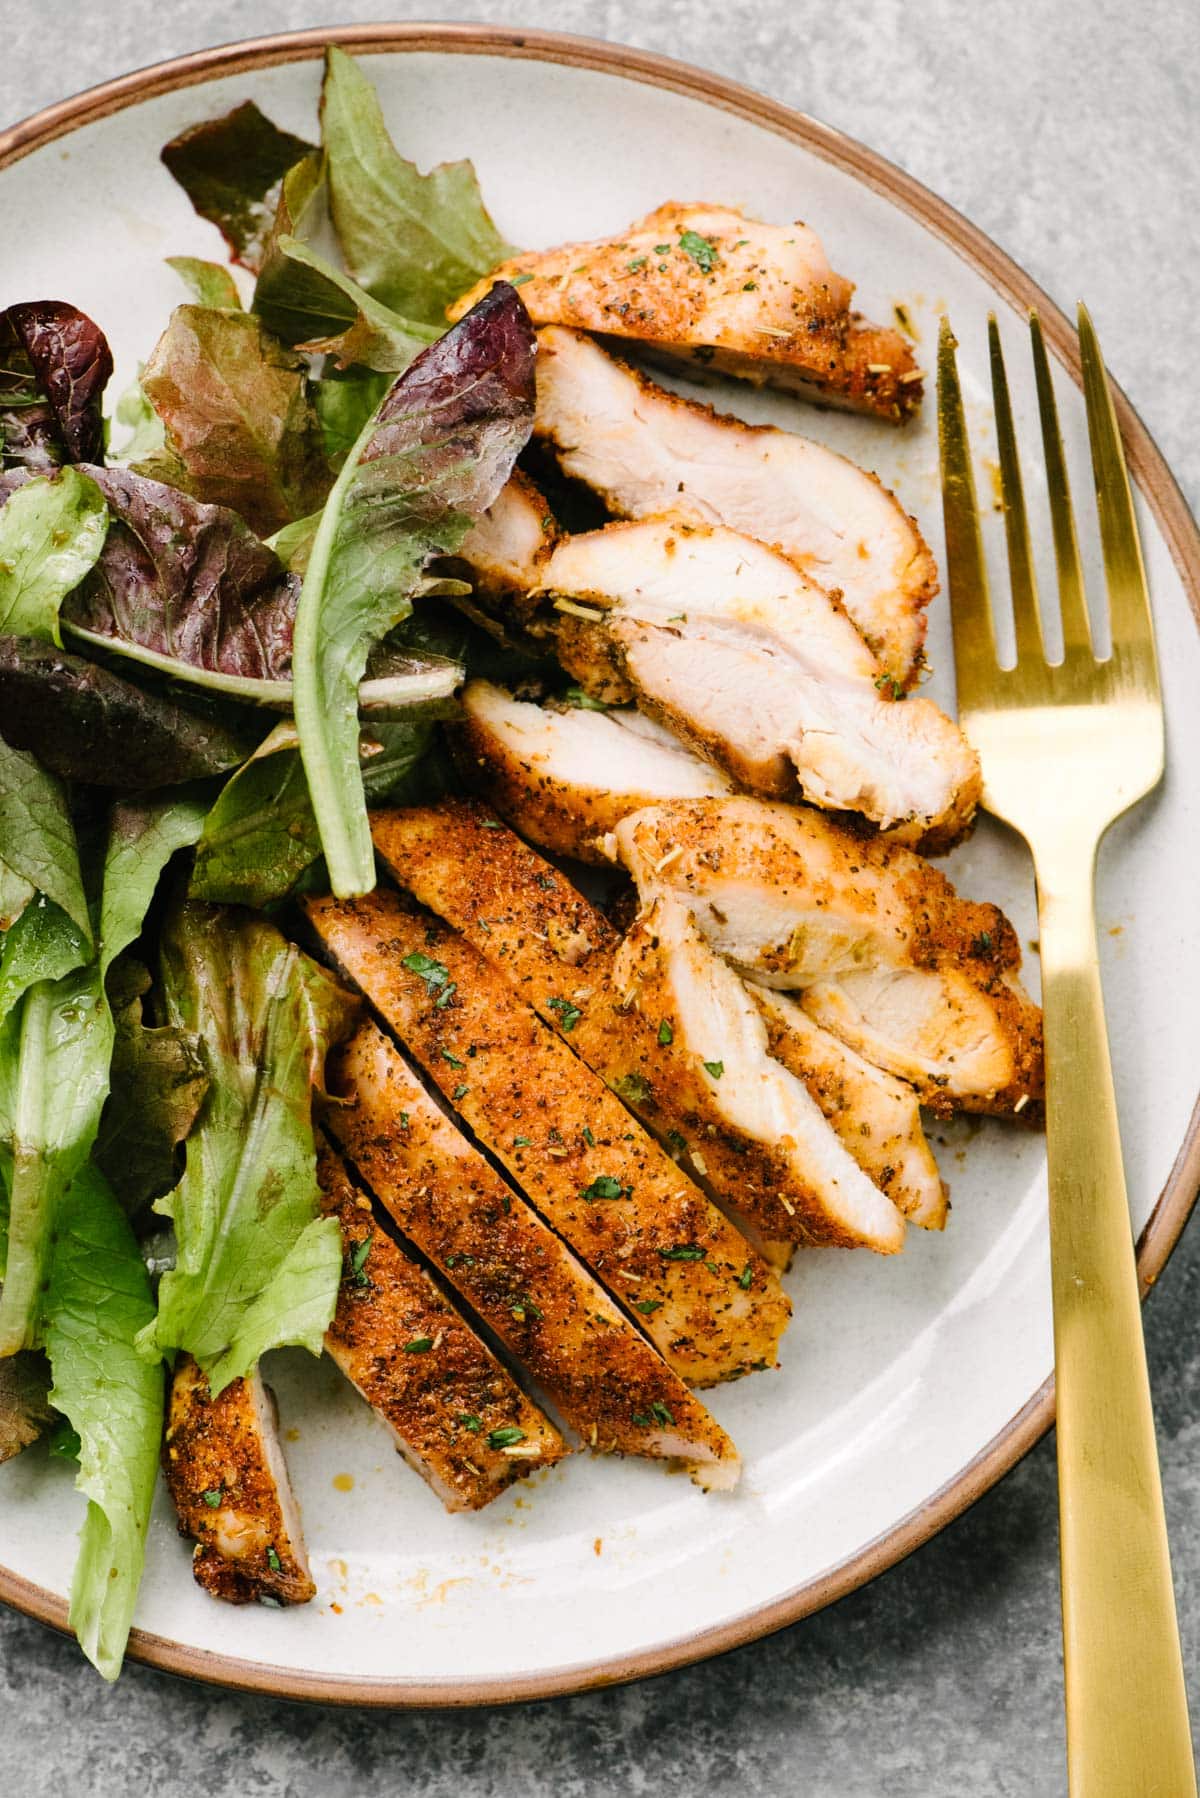 Thinly sliced pieces of roasted boneless chicken thighs on a plate with a tossed green salad and a gold fork.